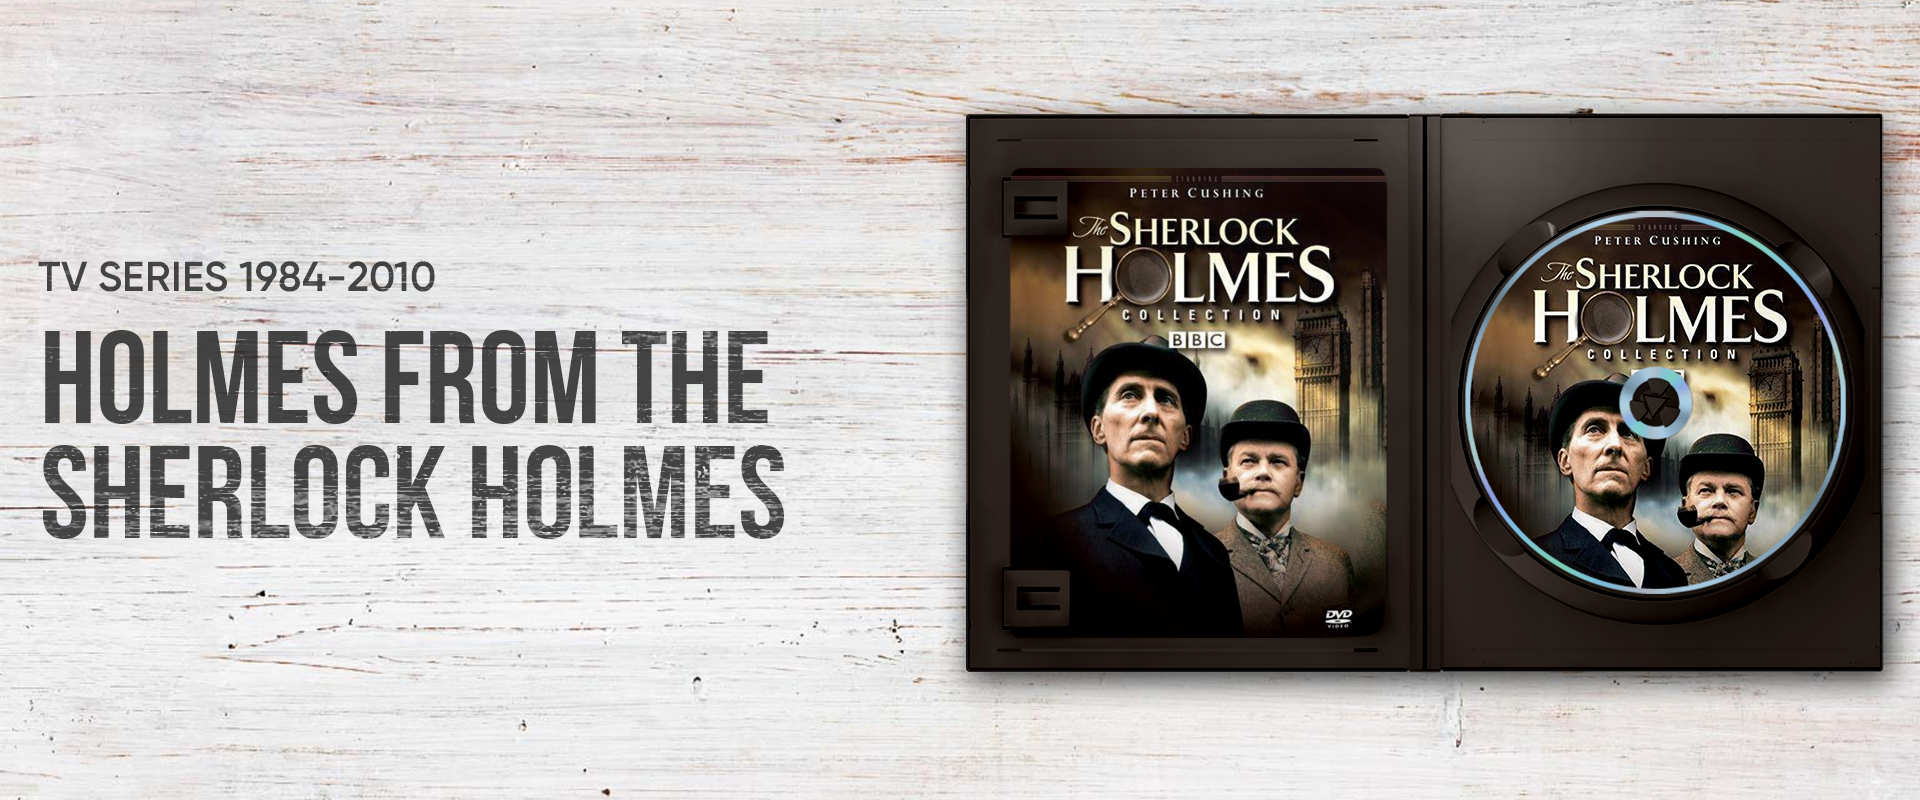 Holmes from the TV series Sherlock Holmes